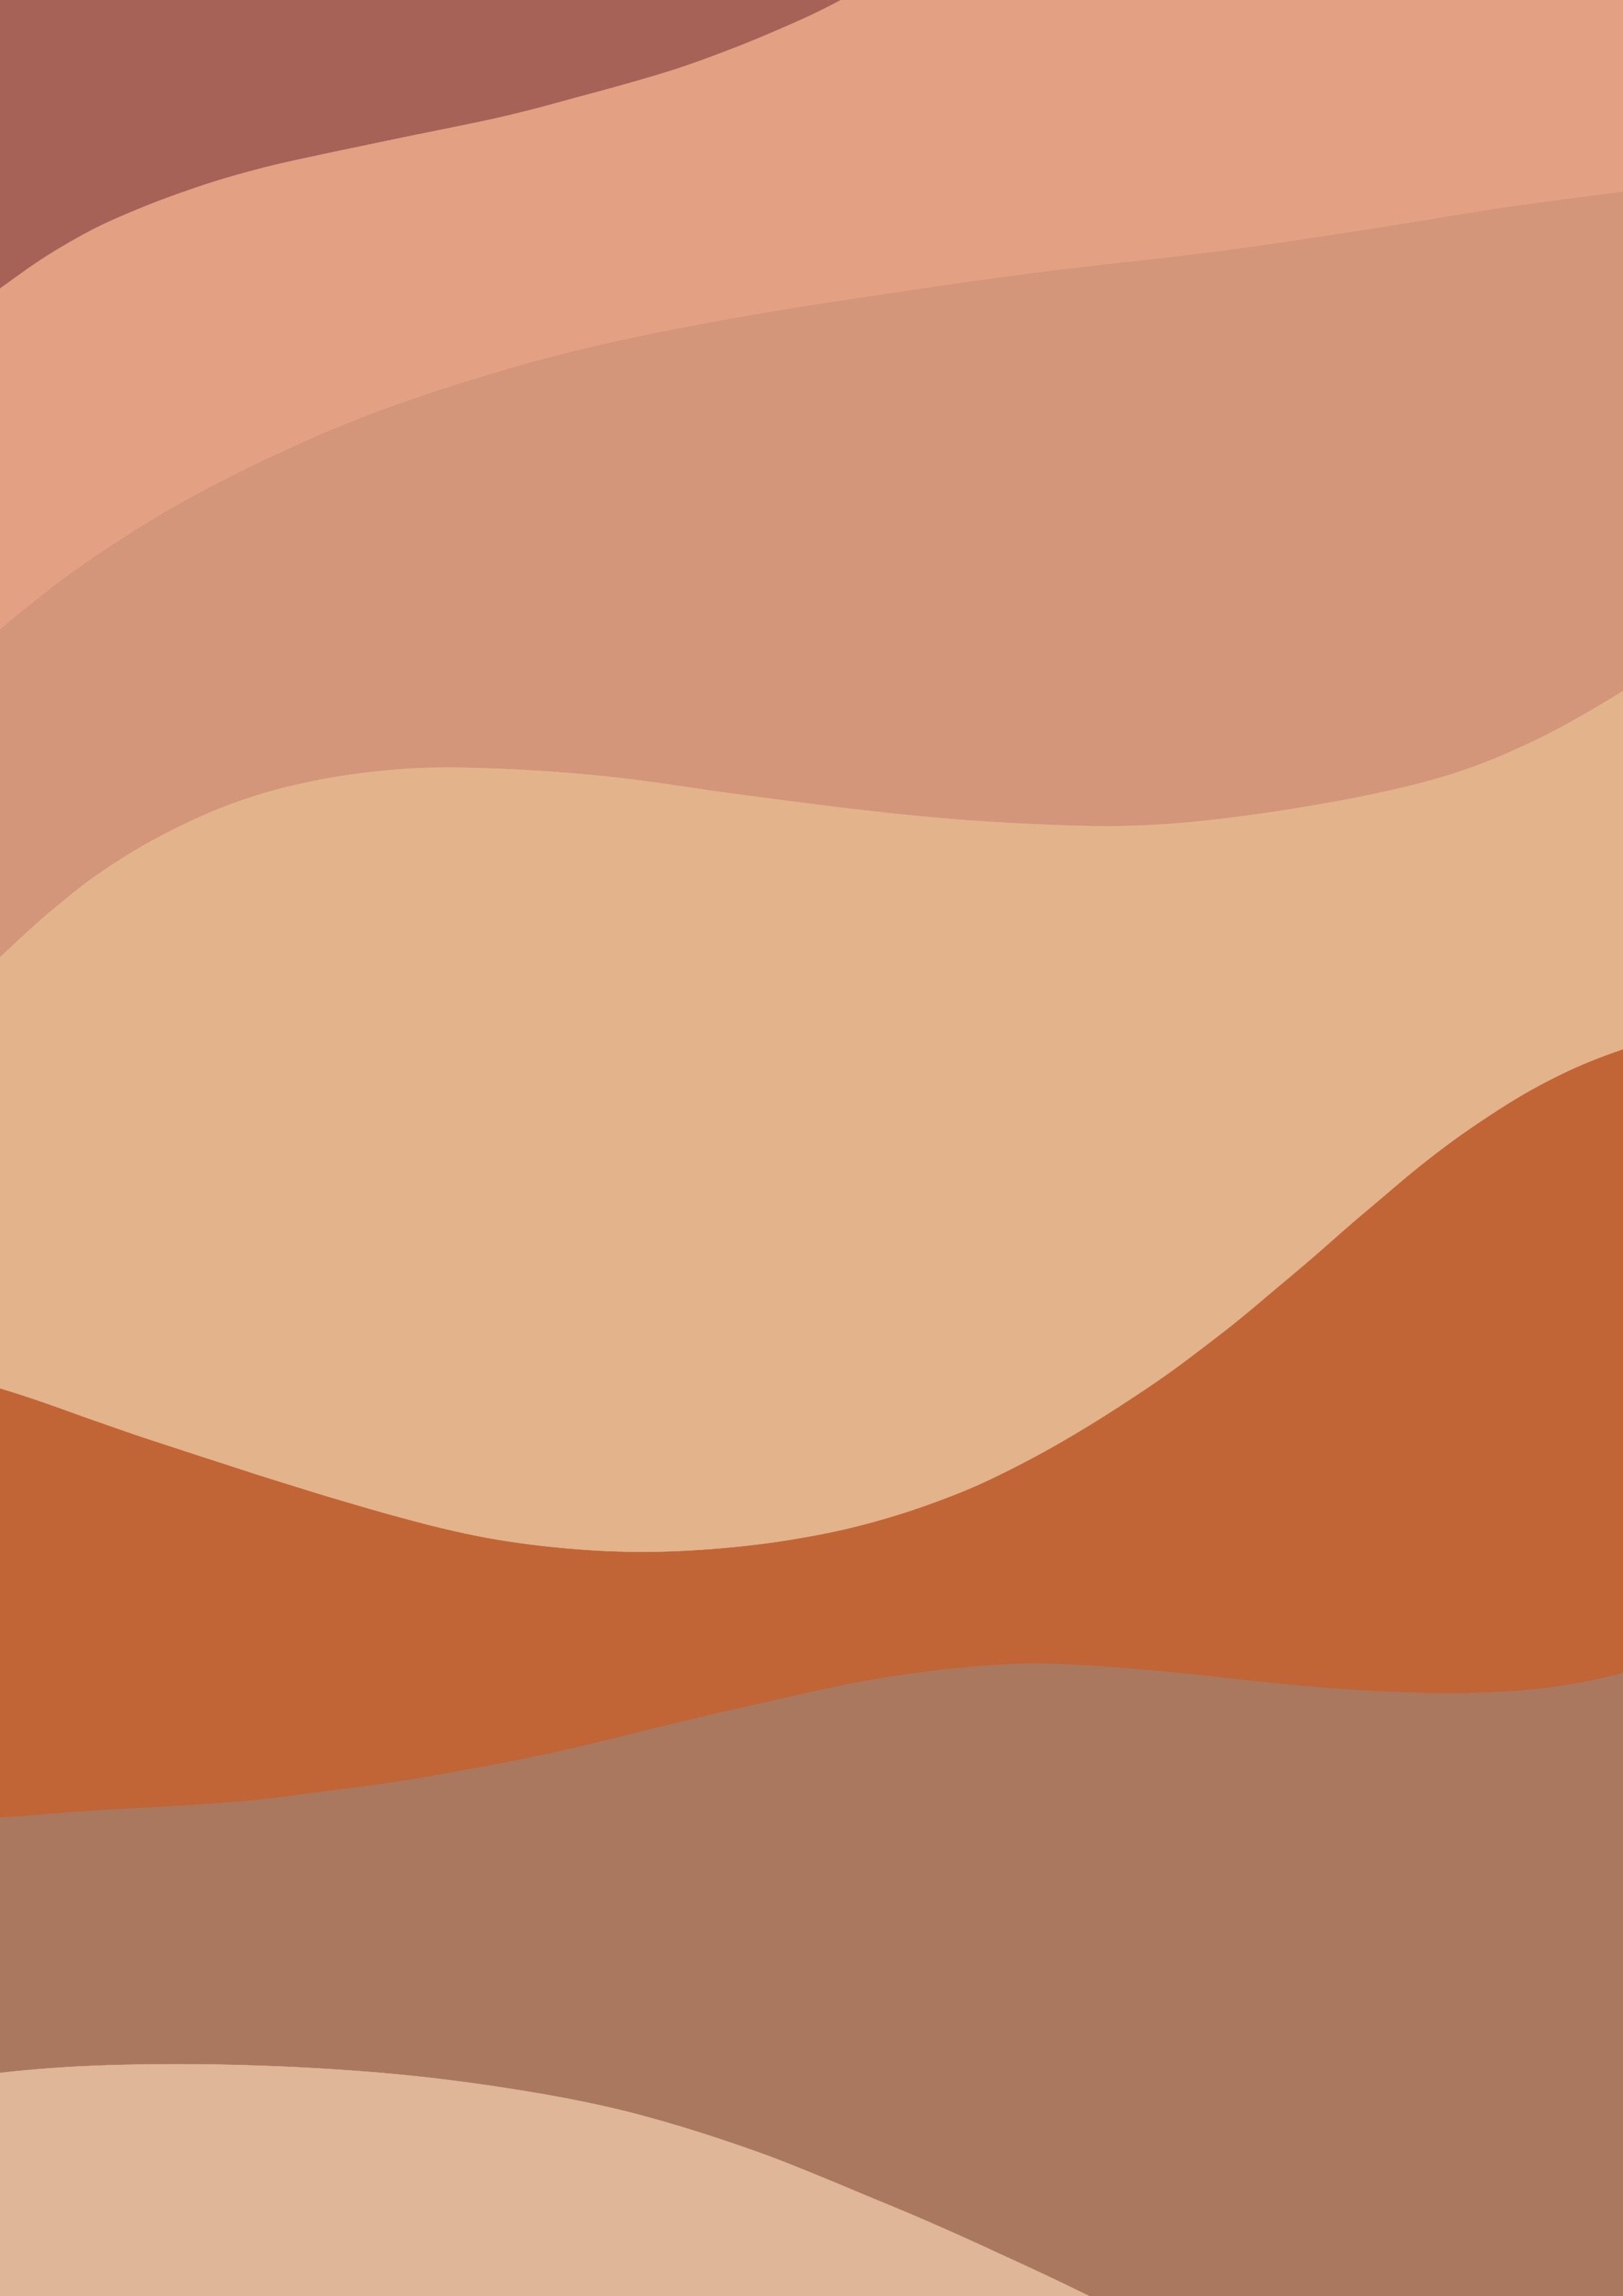 A colorful, abstract image of sand dunes - Neutral